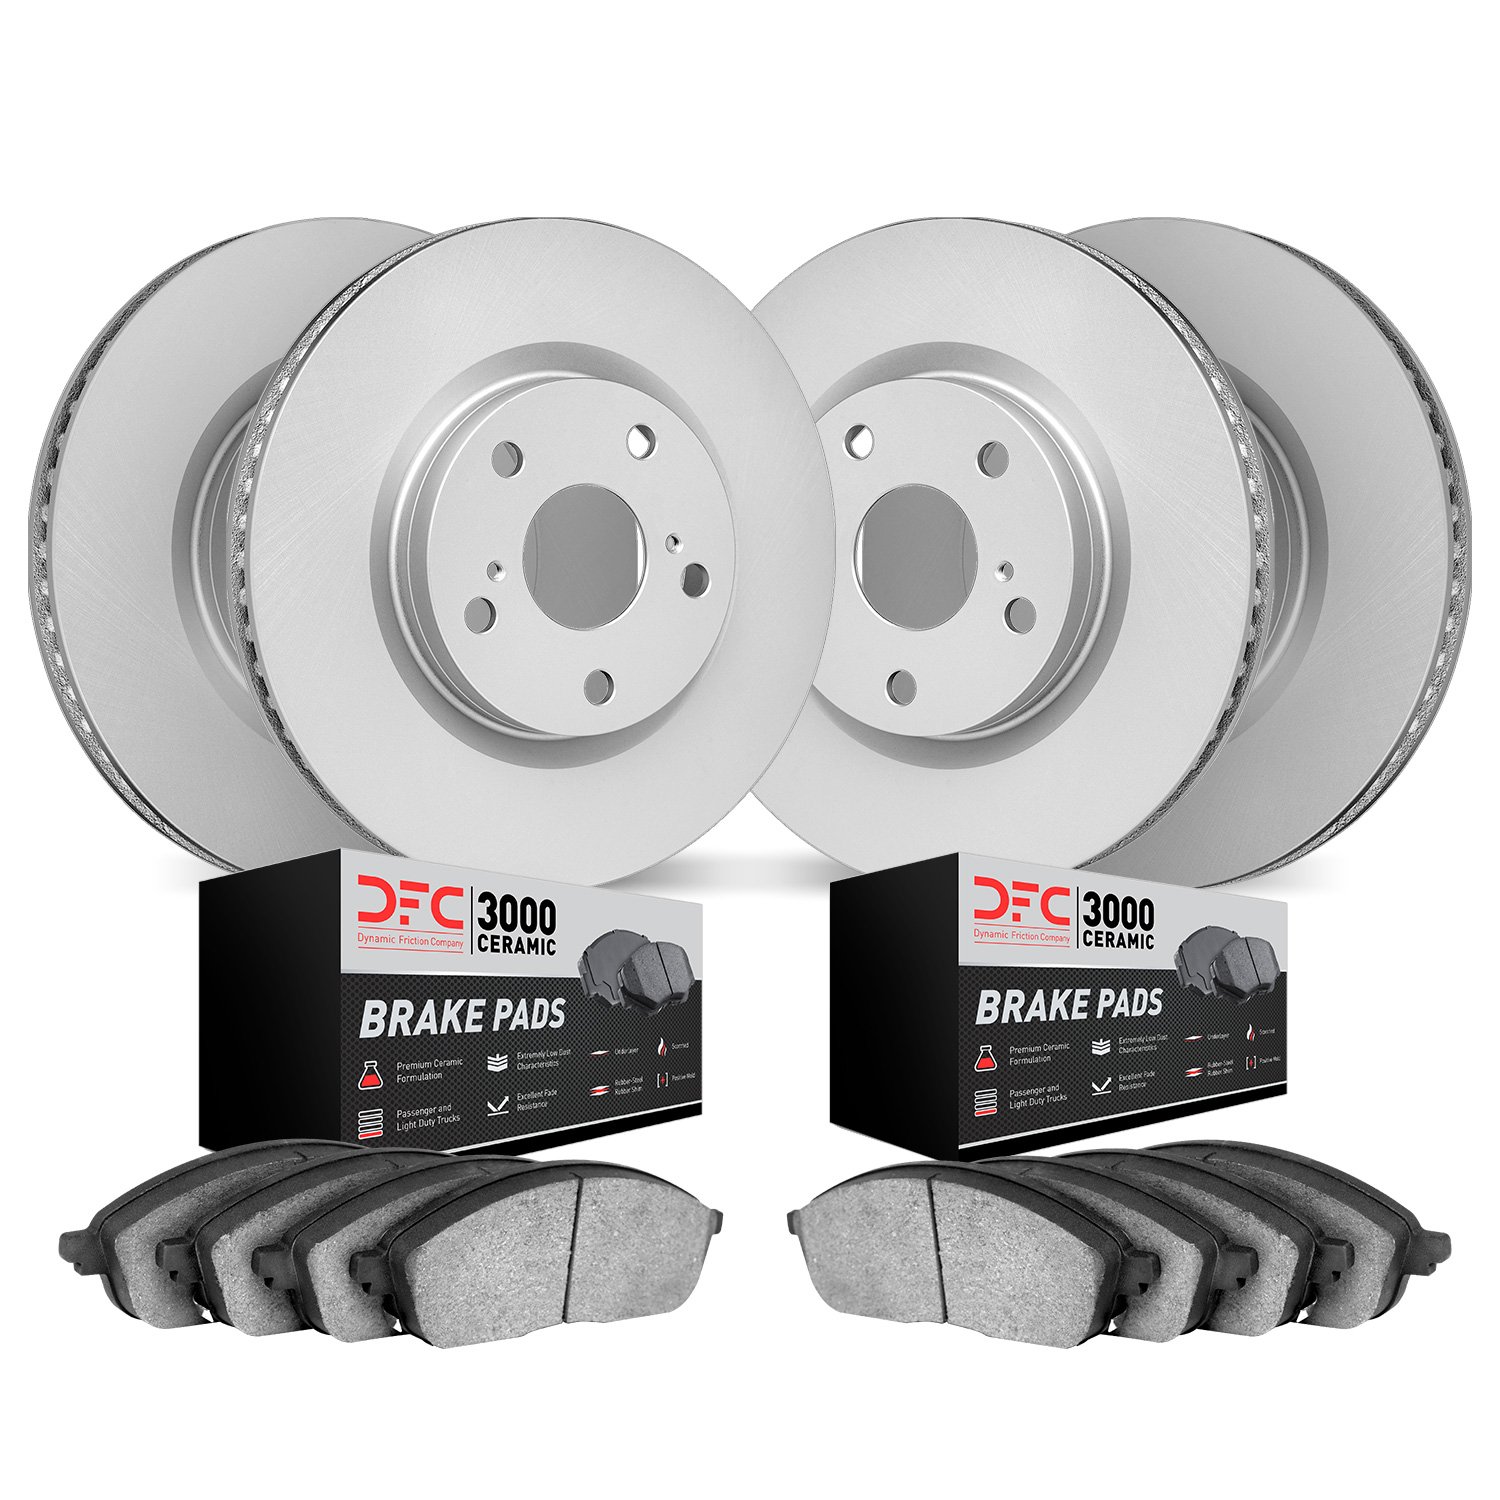 4304-31029 Geospec Brake Rotors with 3000-Series Ceramic Brake Pads Kit, 2005-2008 BMW, Position: Front and Rear